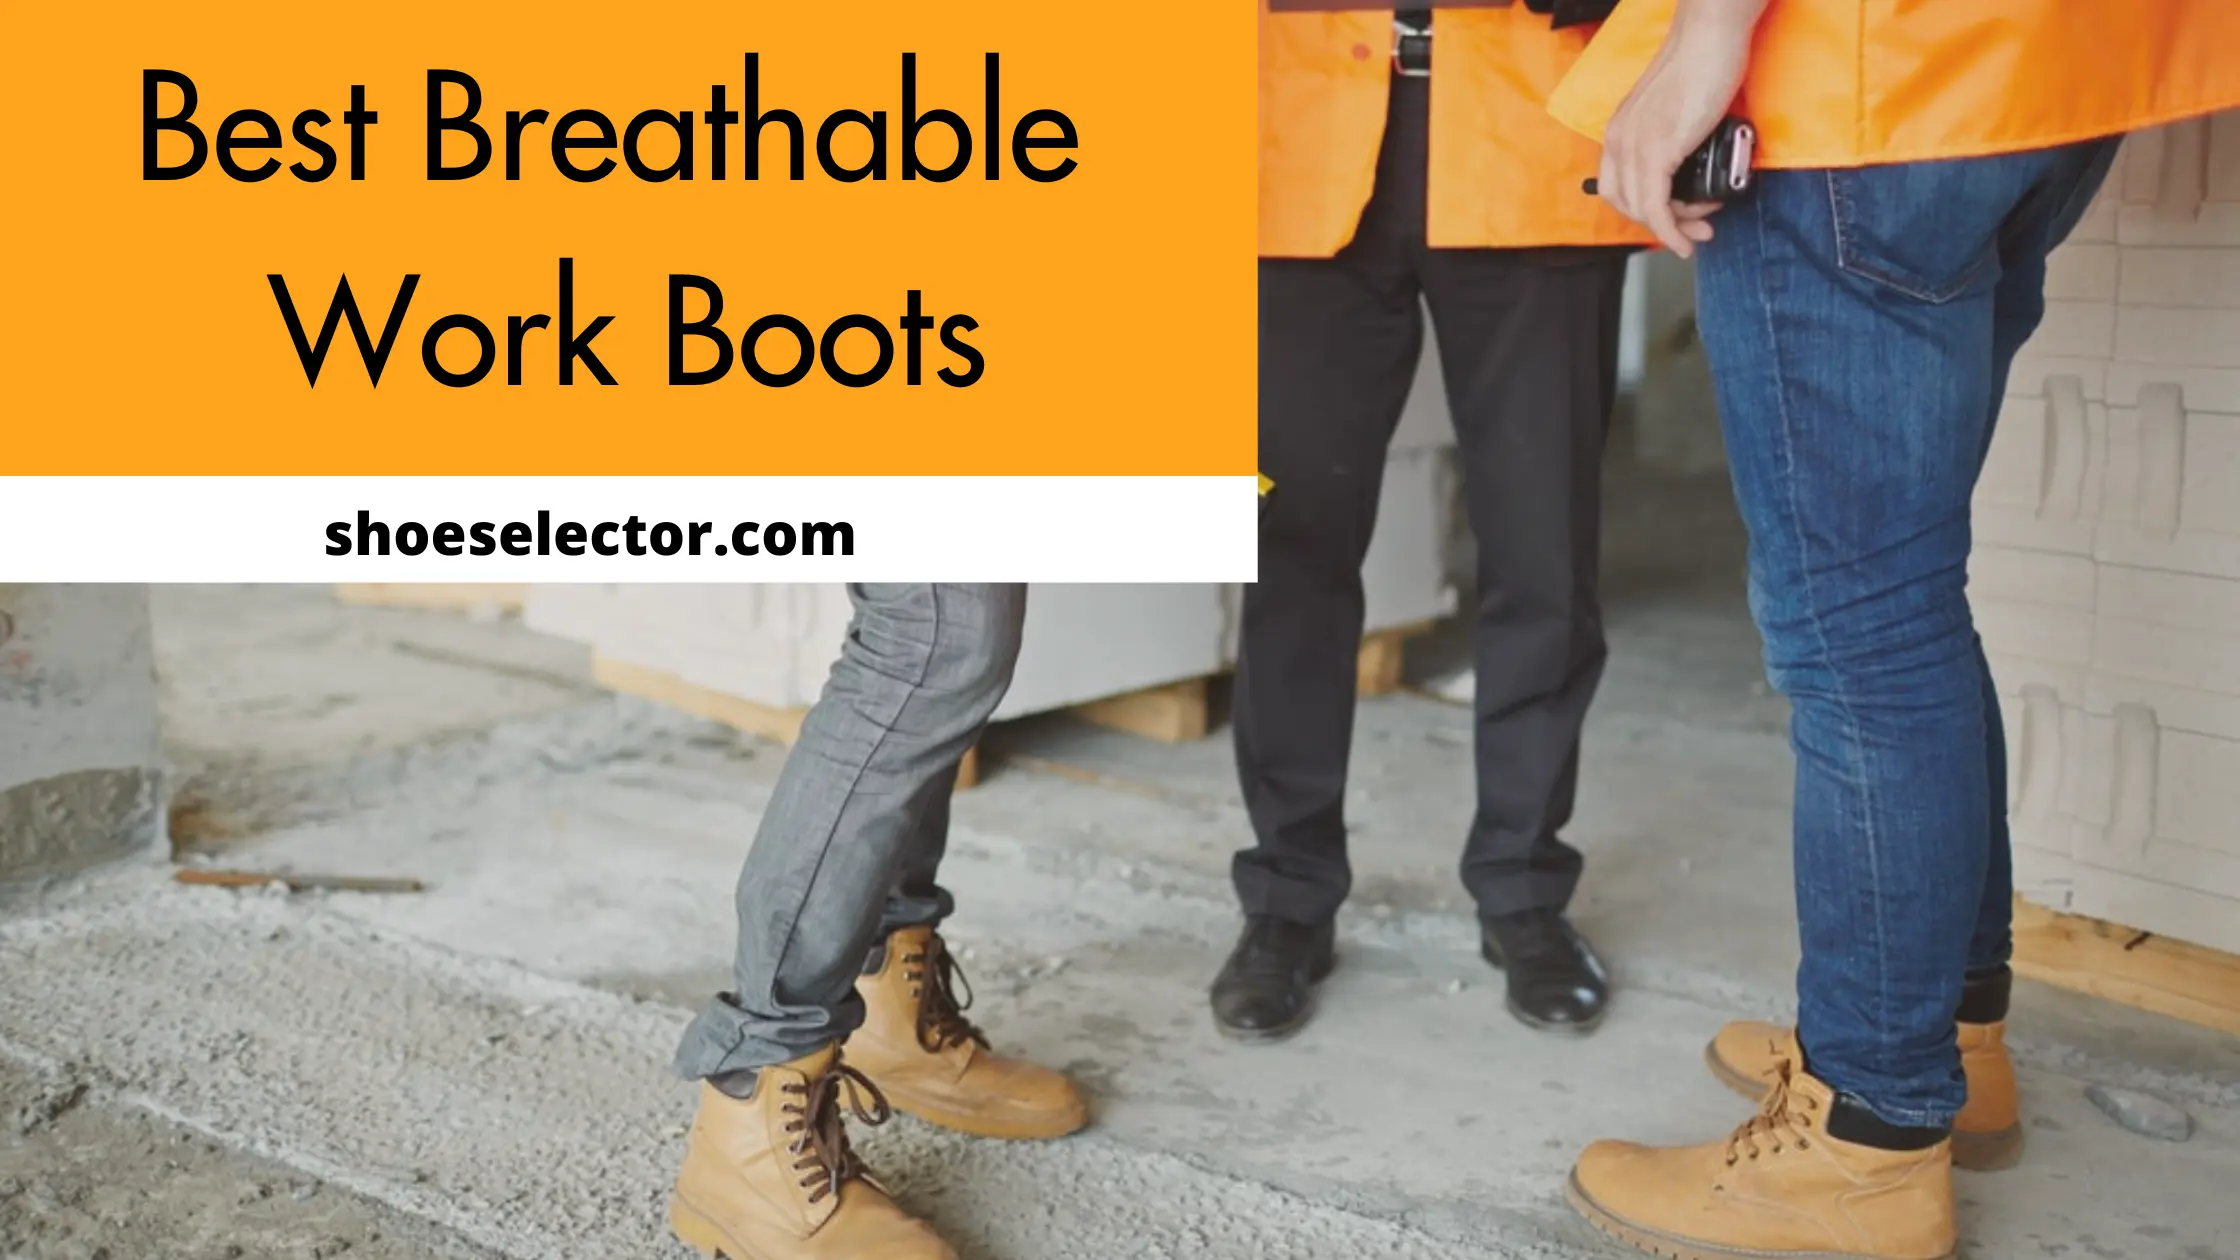 Best Breathable Work Boots - Comprehensive Guide